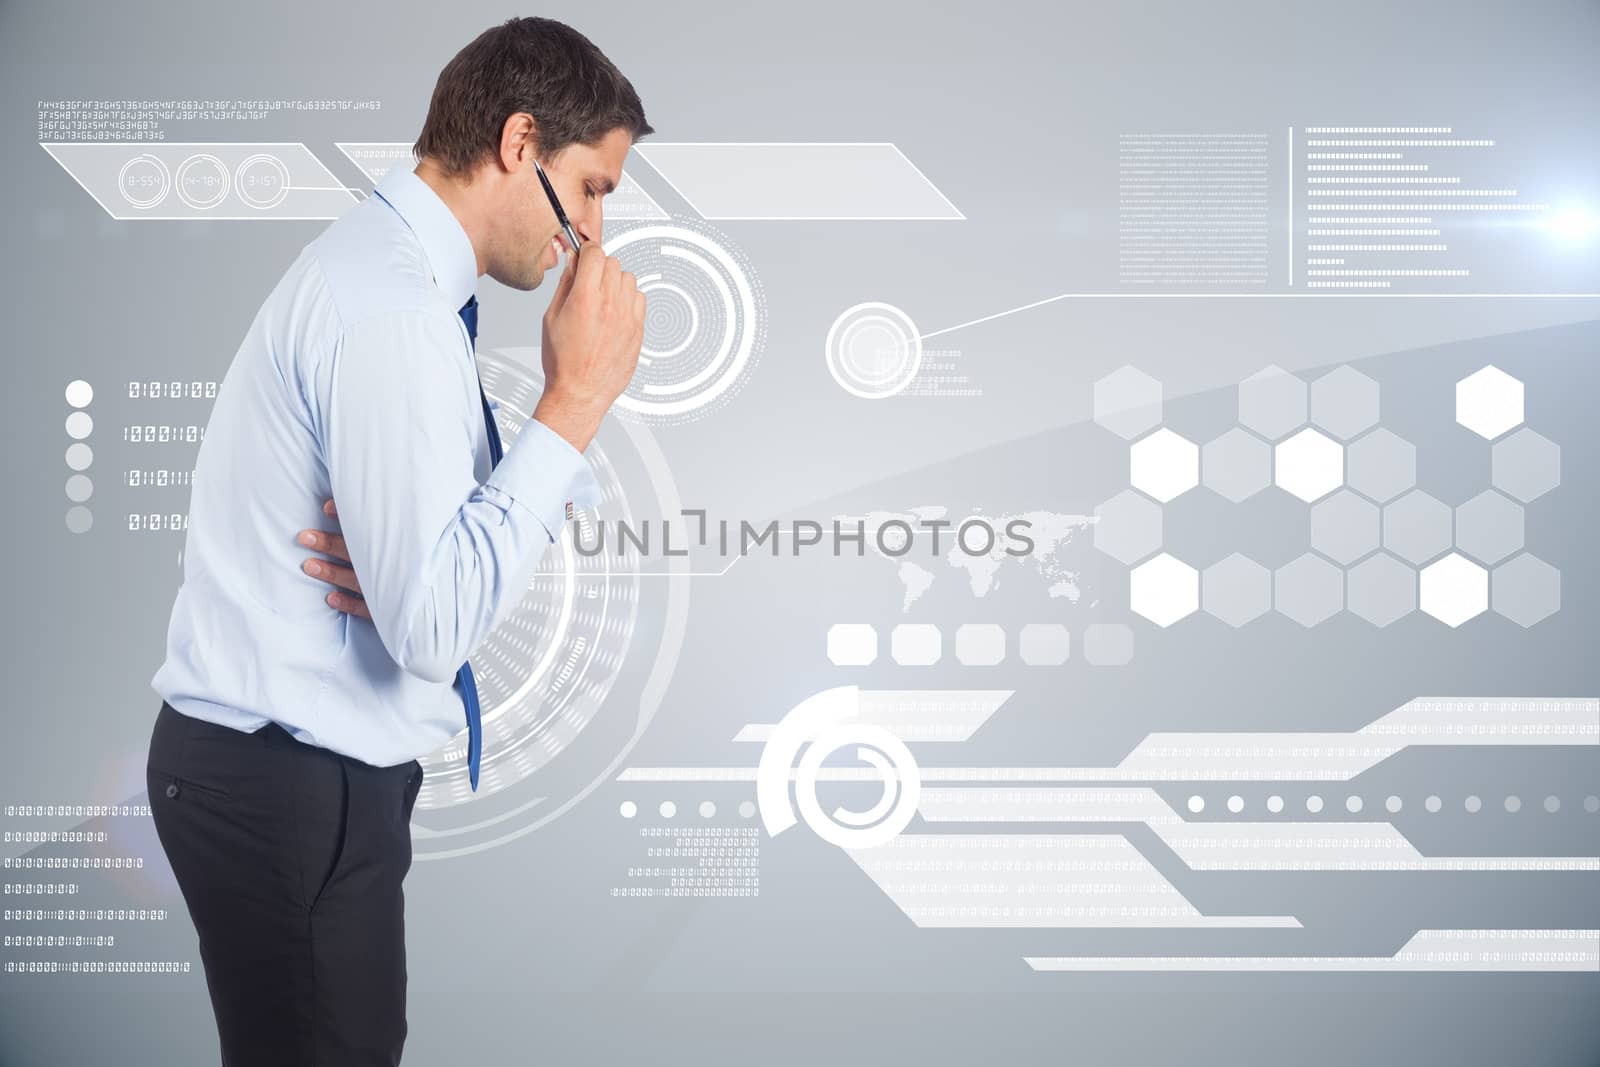 Thinking businessman holding pen against futuristic technology interface